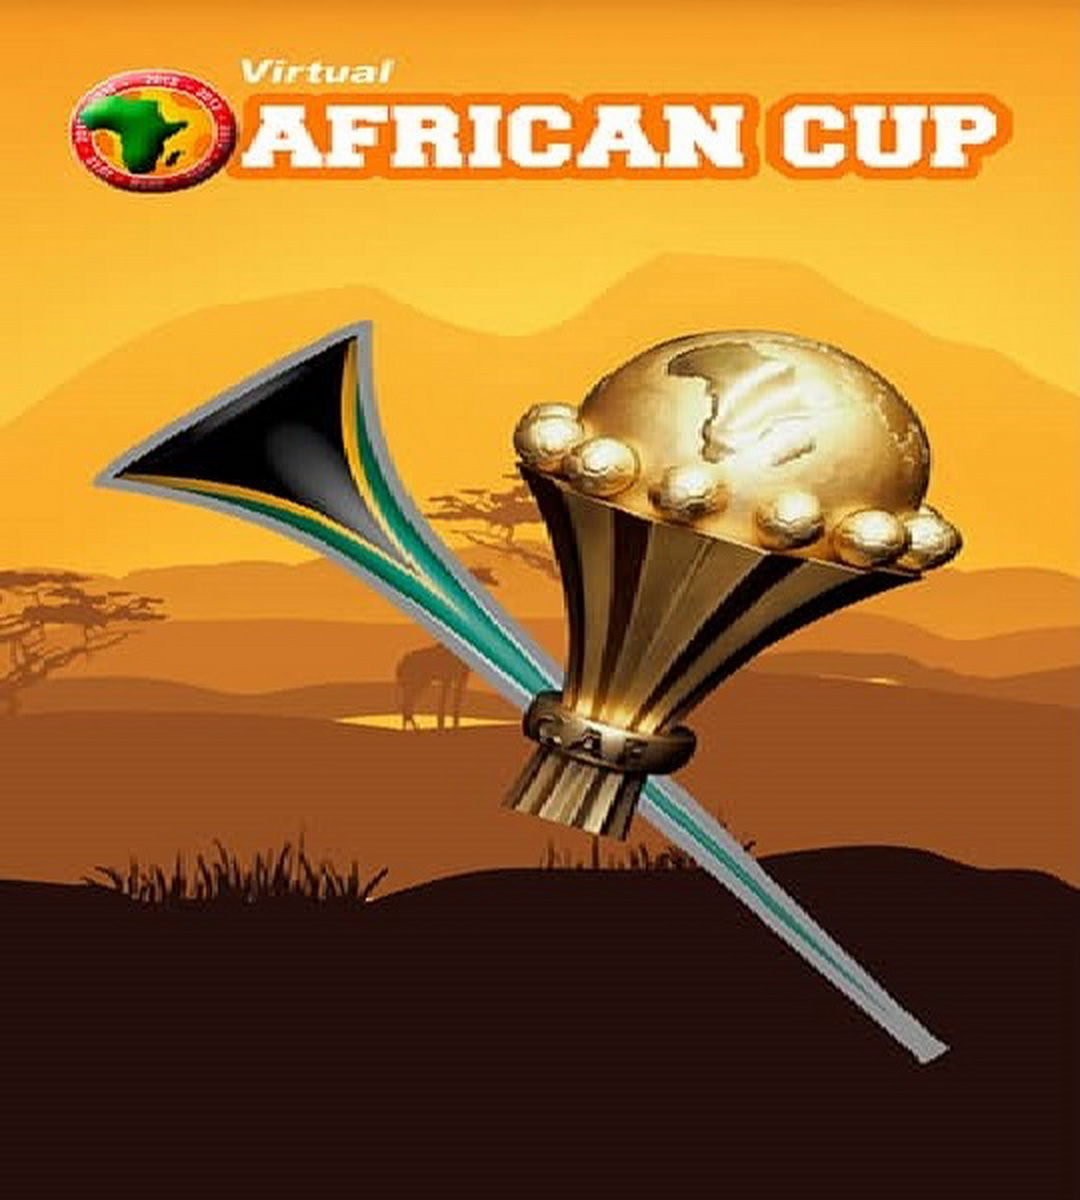 Virtual African Cup demo